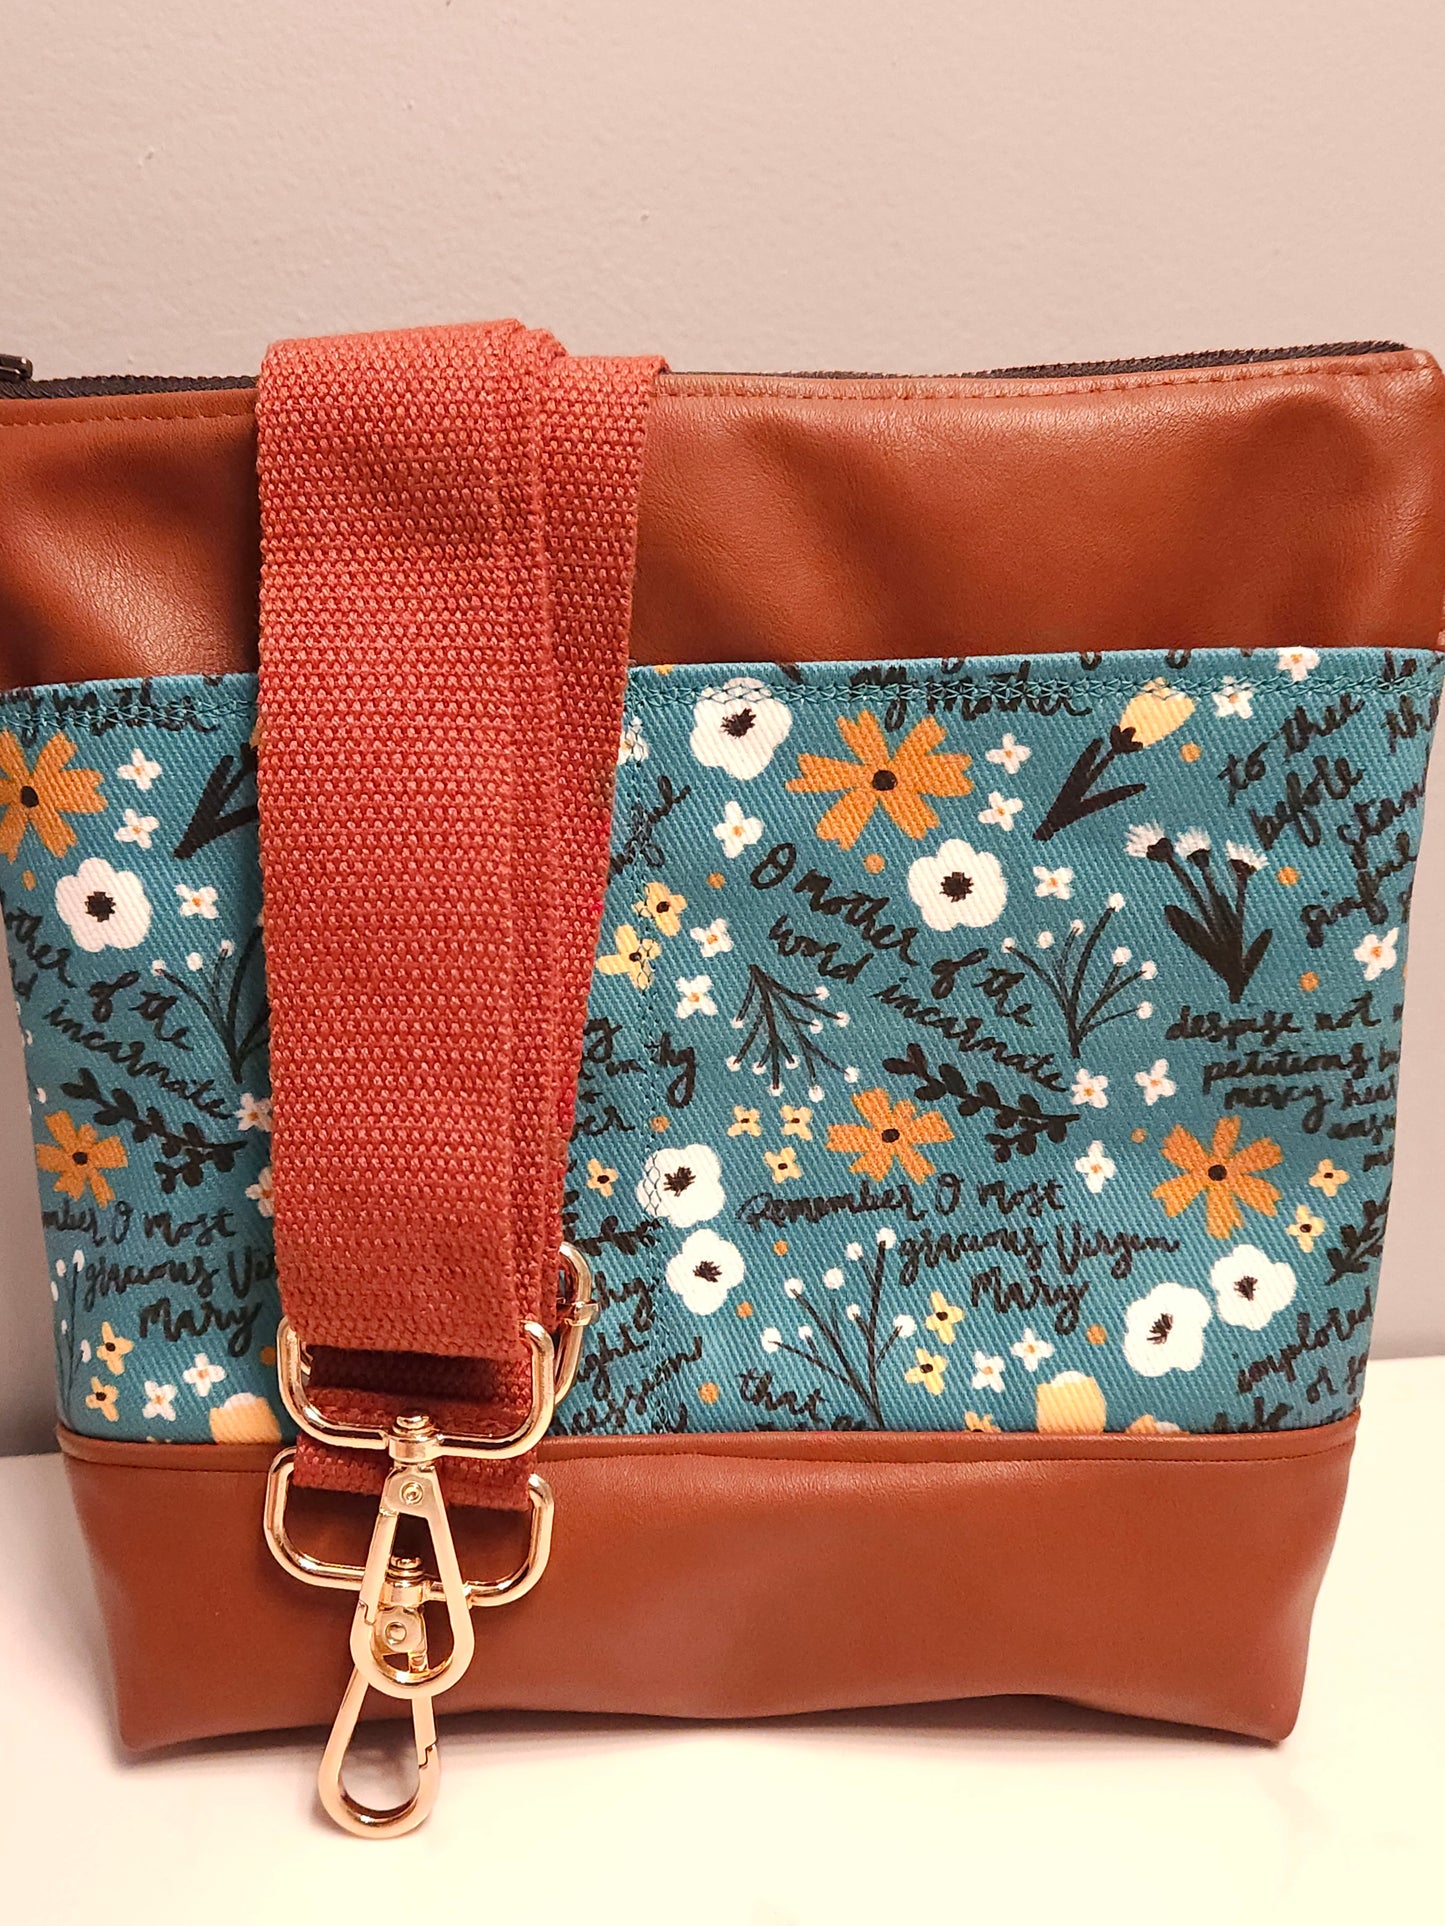 Catholic crossbody with exterior slip pockets in the Melissa Collection